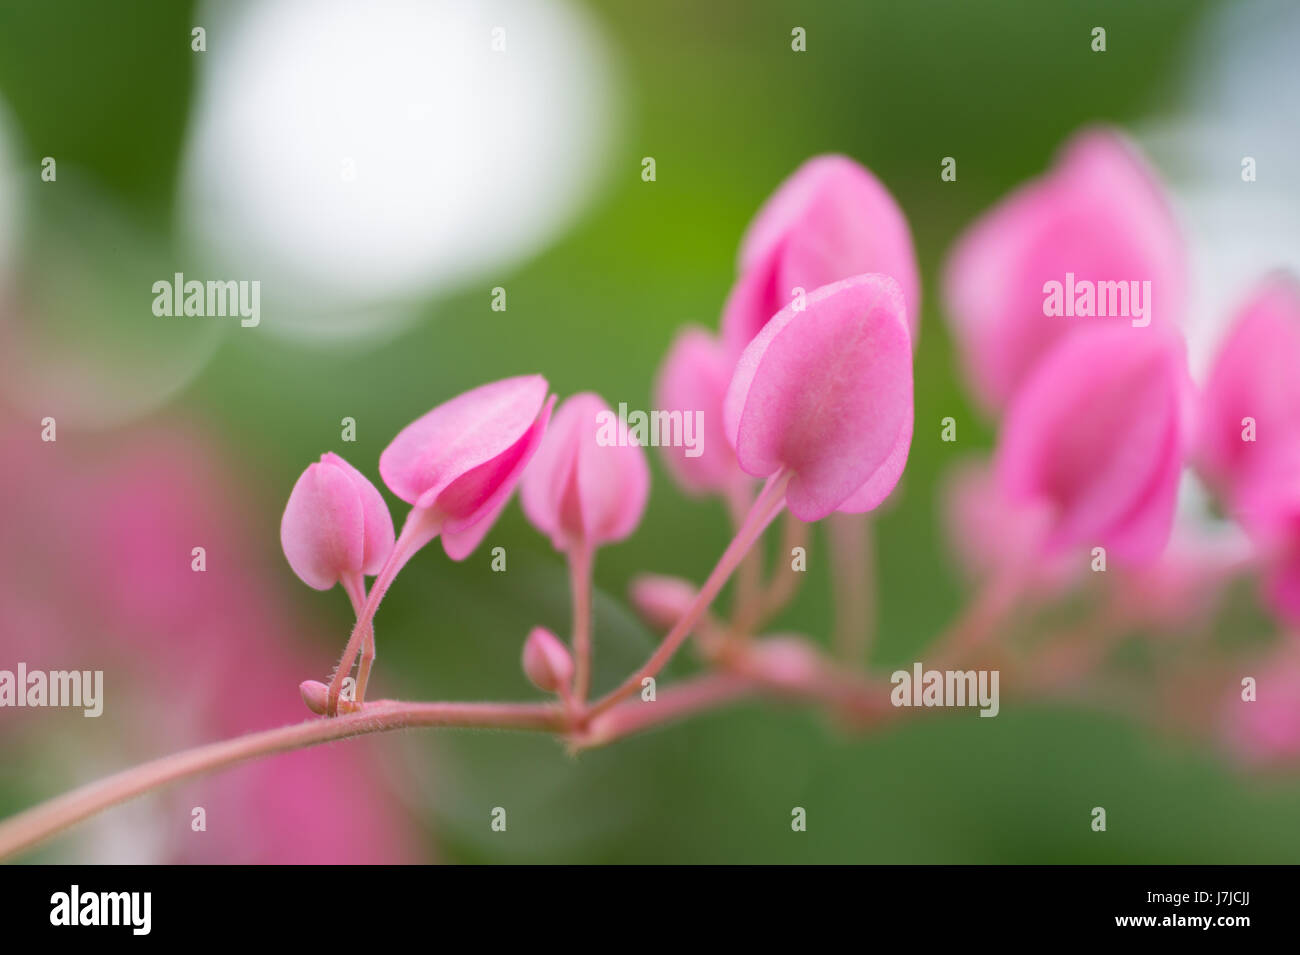 Coral vine plant with blur background Stock Photo